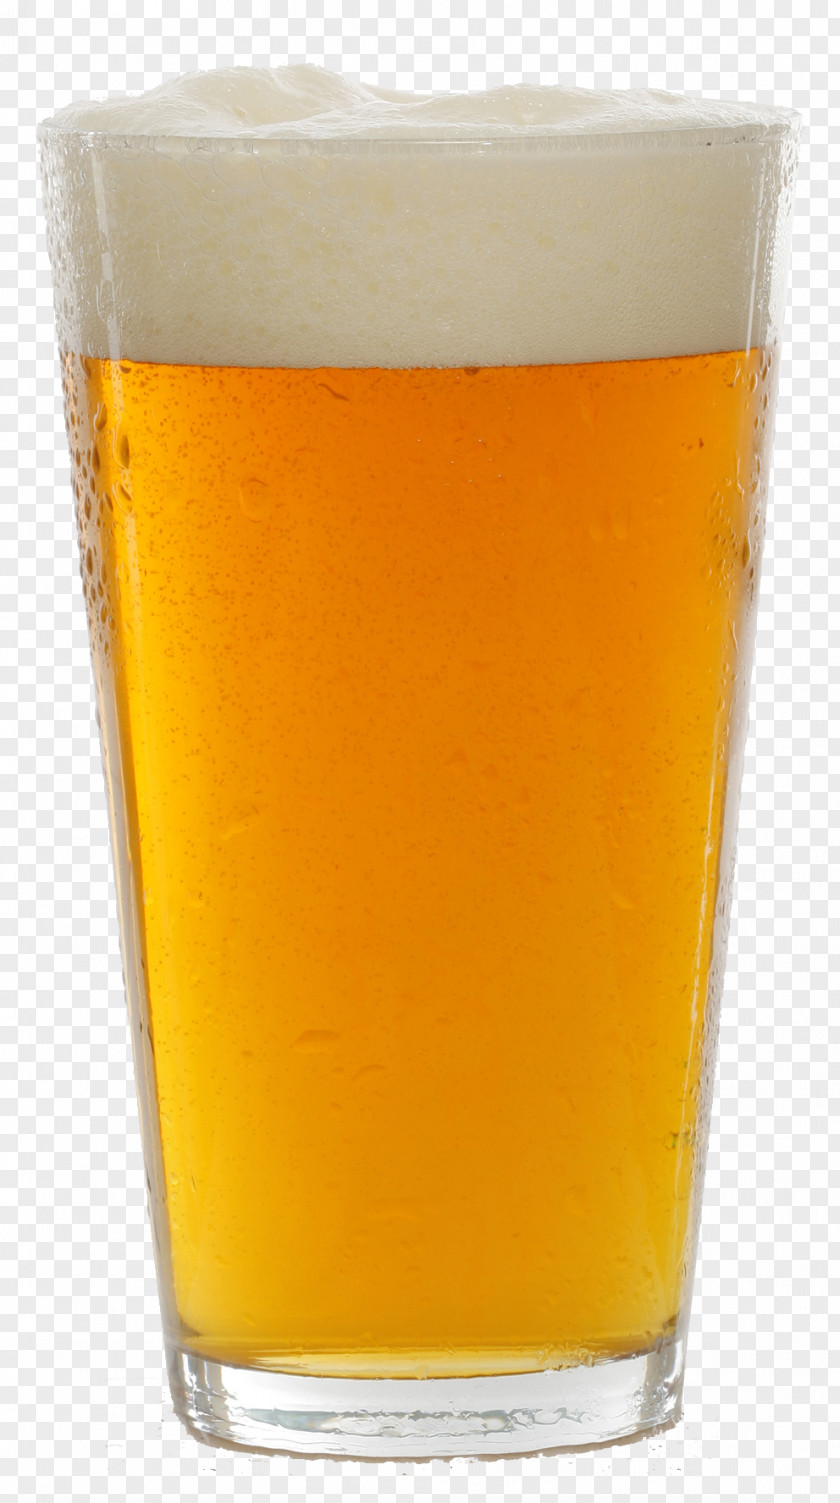 Beer Image Cocktail Wine Pint Glass Glassware PNG